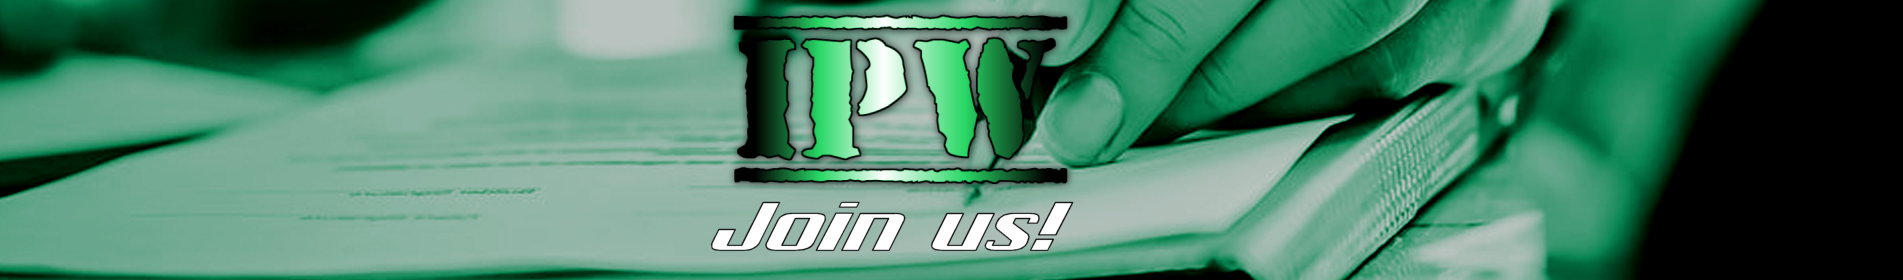 ipw page join green